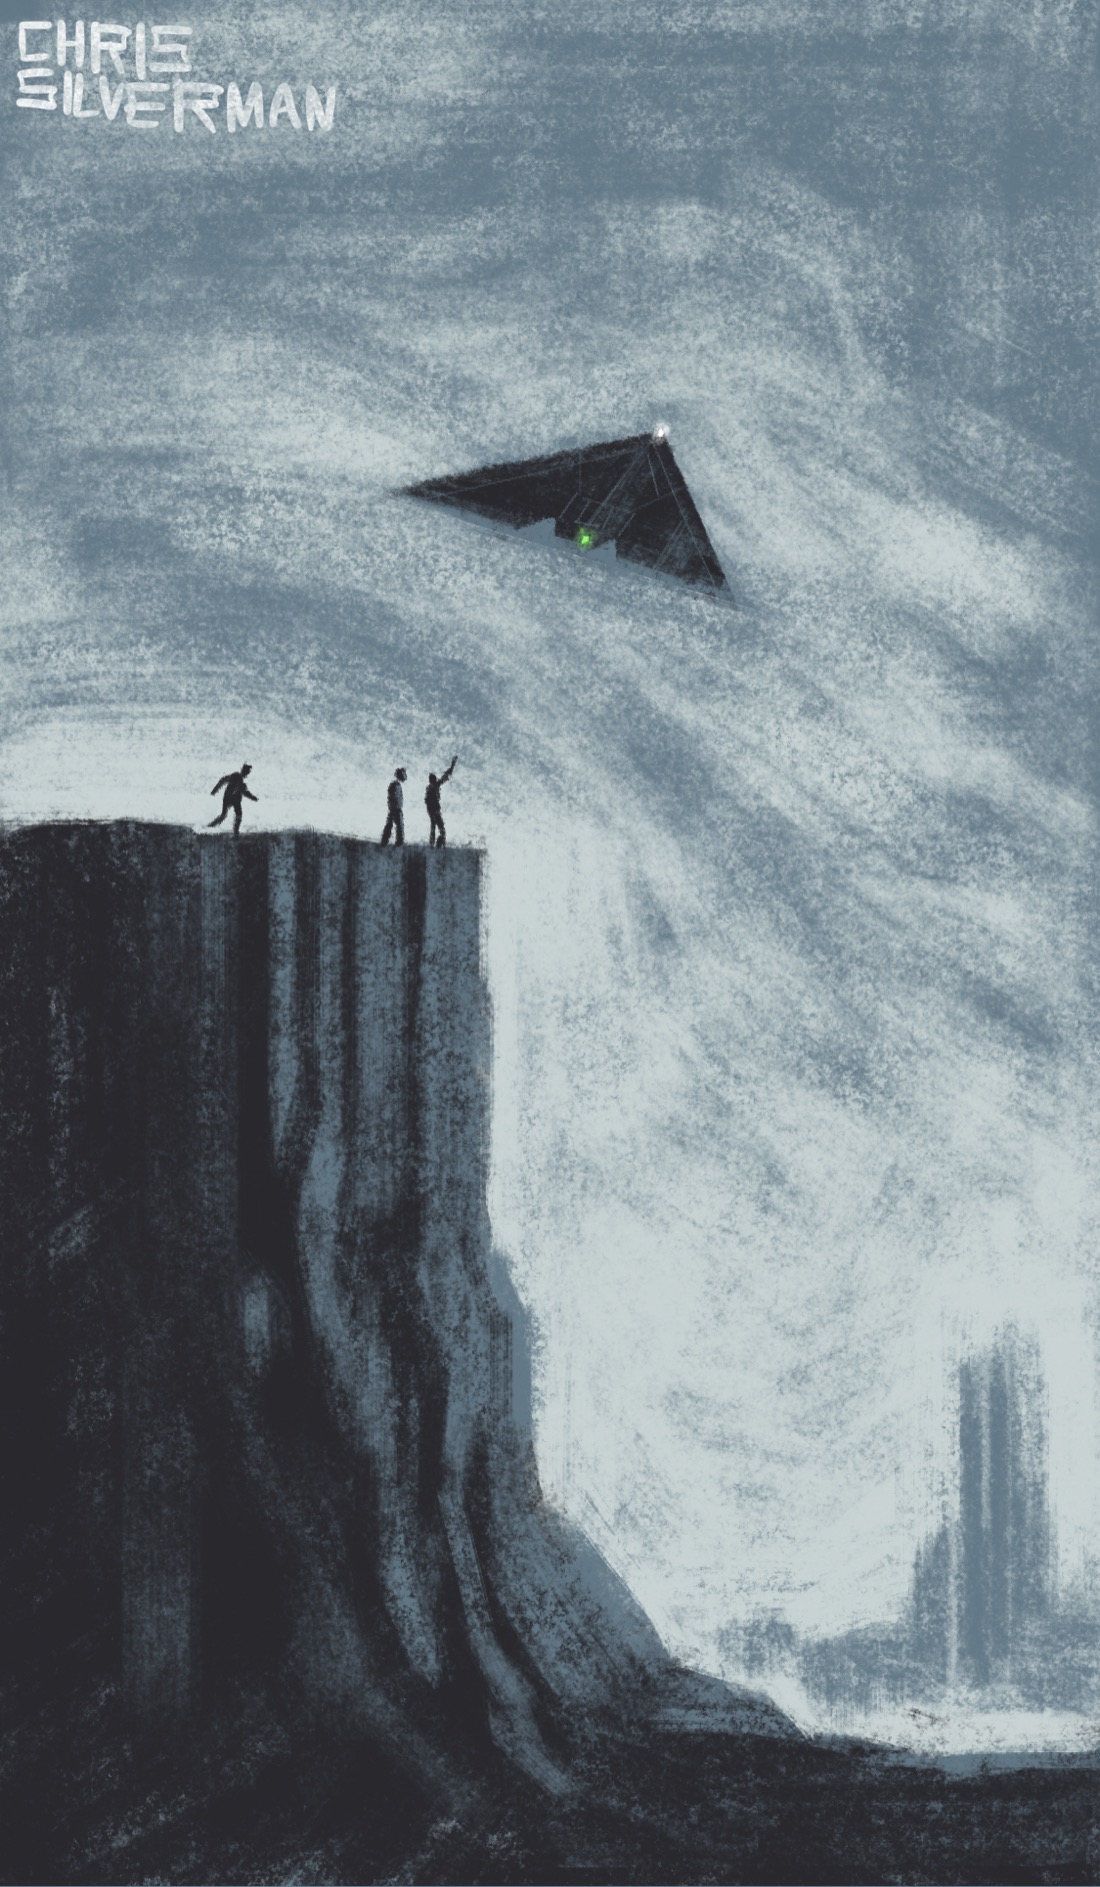 A high cliff, somewhere in the desert. It's a gray day, the clouds heavy in the sky. Gathered at the edge of the cliff are two people, with a third running towards them. Directly above them, relatively close to the ground, is flying a very futuristic, triangular aircraft. Visible in the background is the blurry outline of another natural formation; a tower of rock. This is a primarily black and gray drawing; the only color is a tiny green light on the underside of the aircraft.